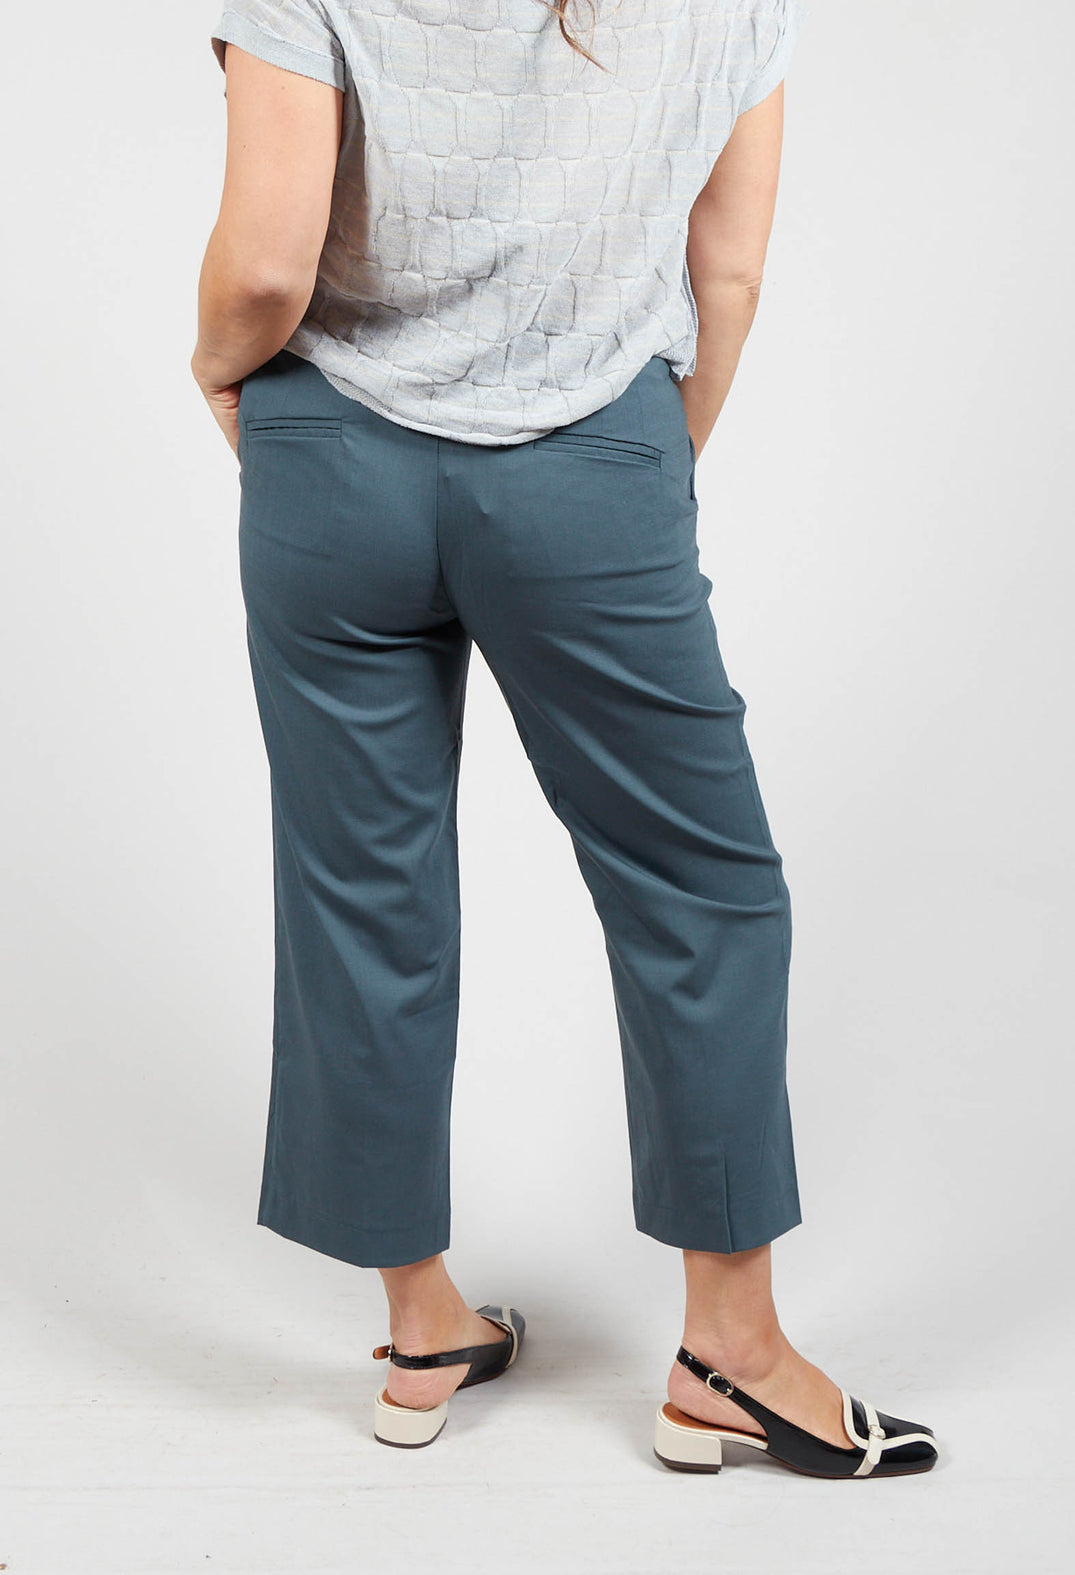 Trousers with Button at Waistband in Lagoon Blue